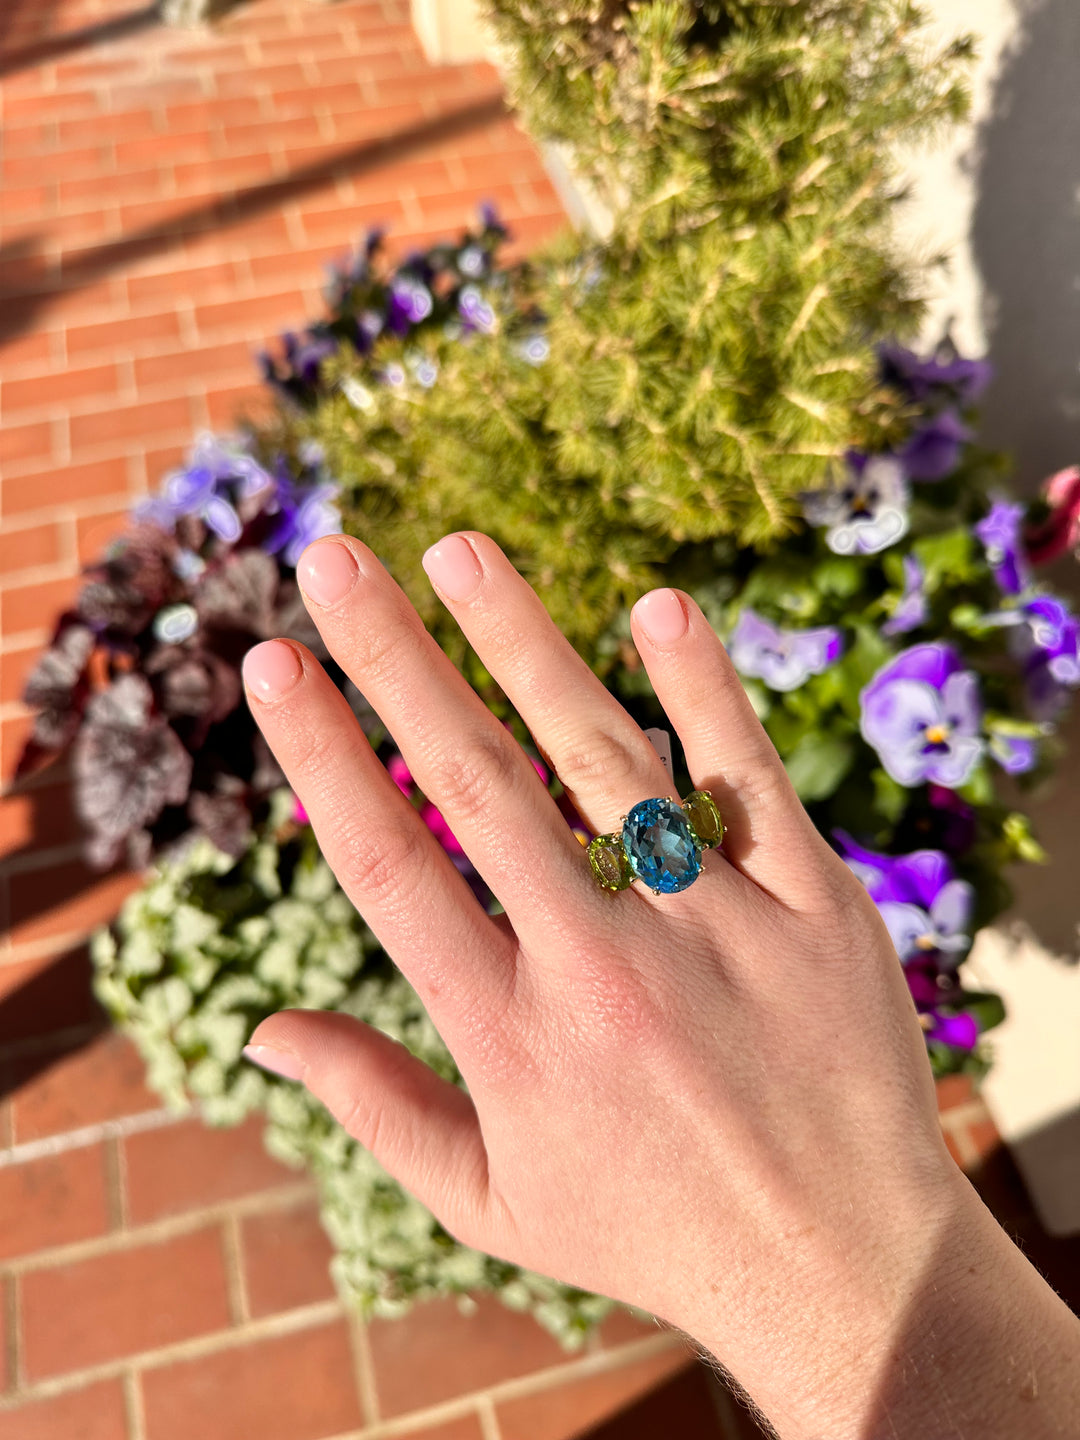 14kt Ring with Blue Topaz and Peidot